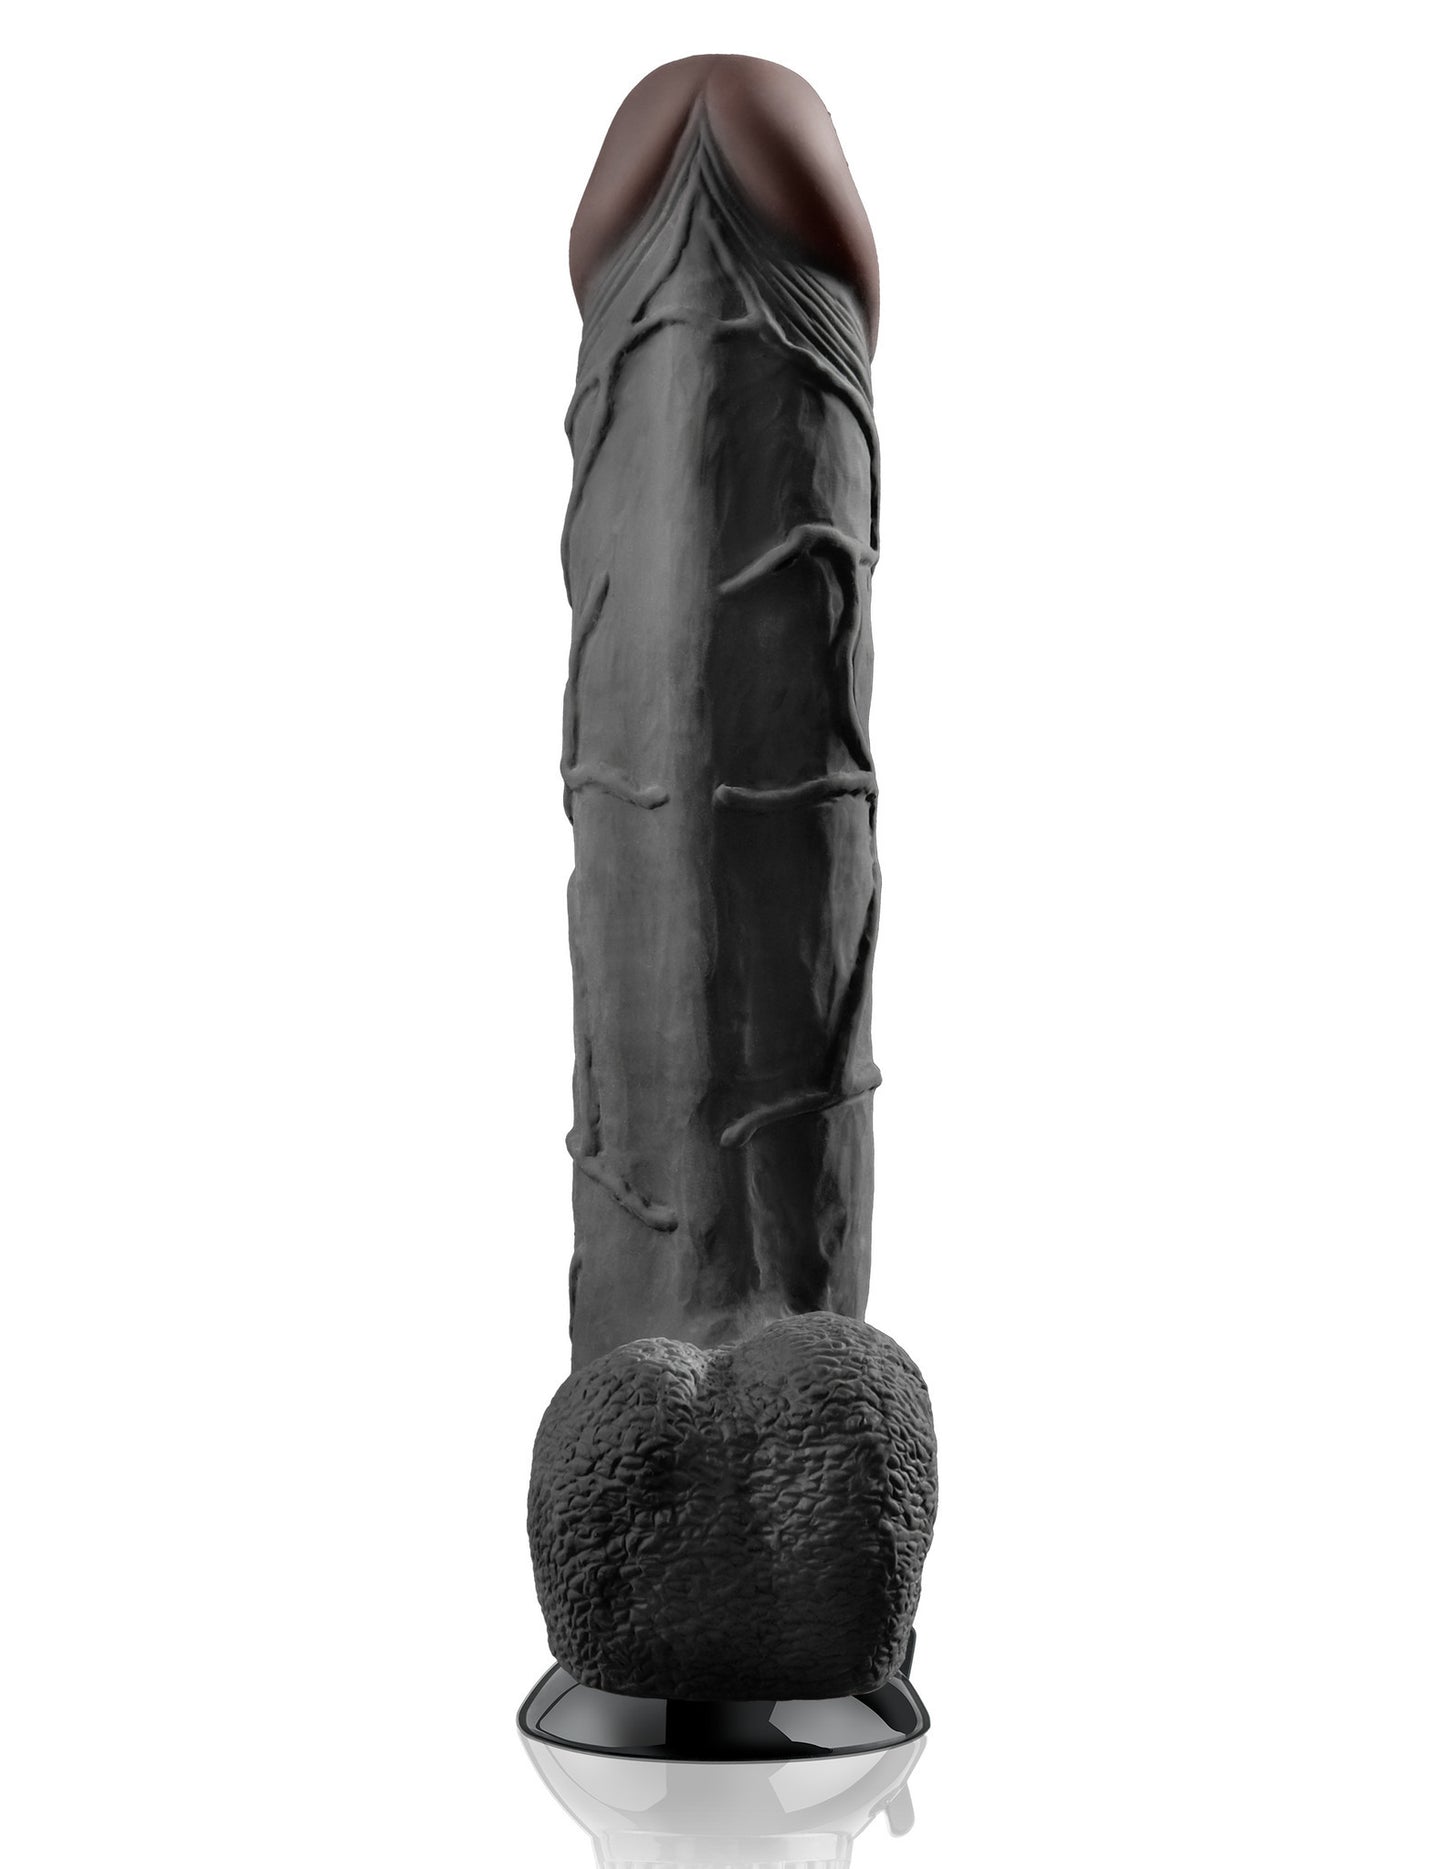 Real Feel Deluxe No. 12 Vibrating 12" Dildo  - Club X